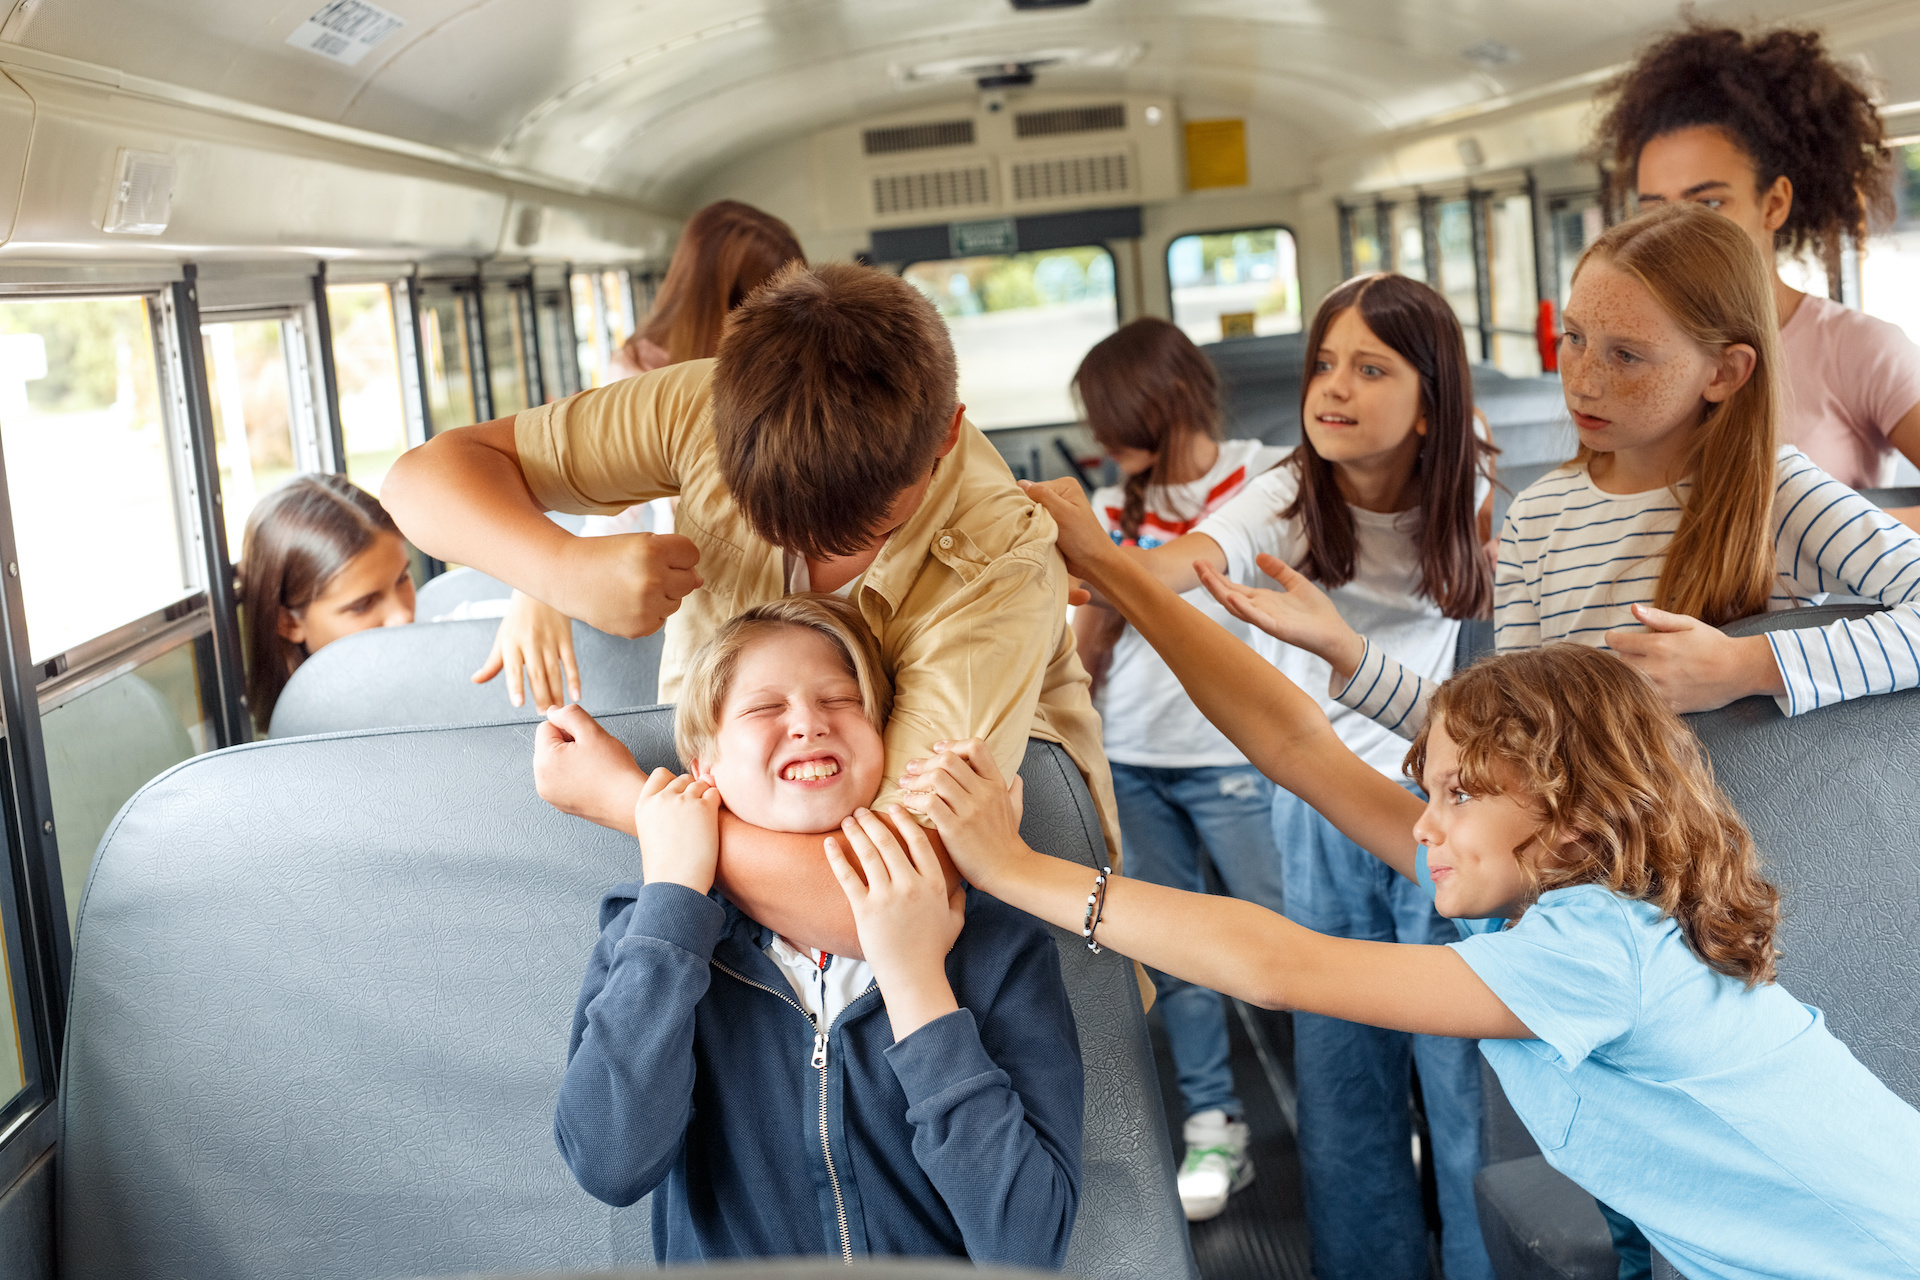 Tackling the Menace: Addressing Bullying in American Schools